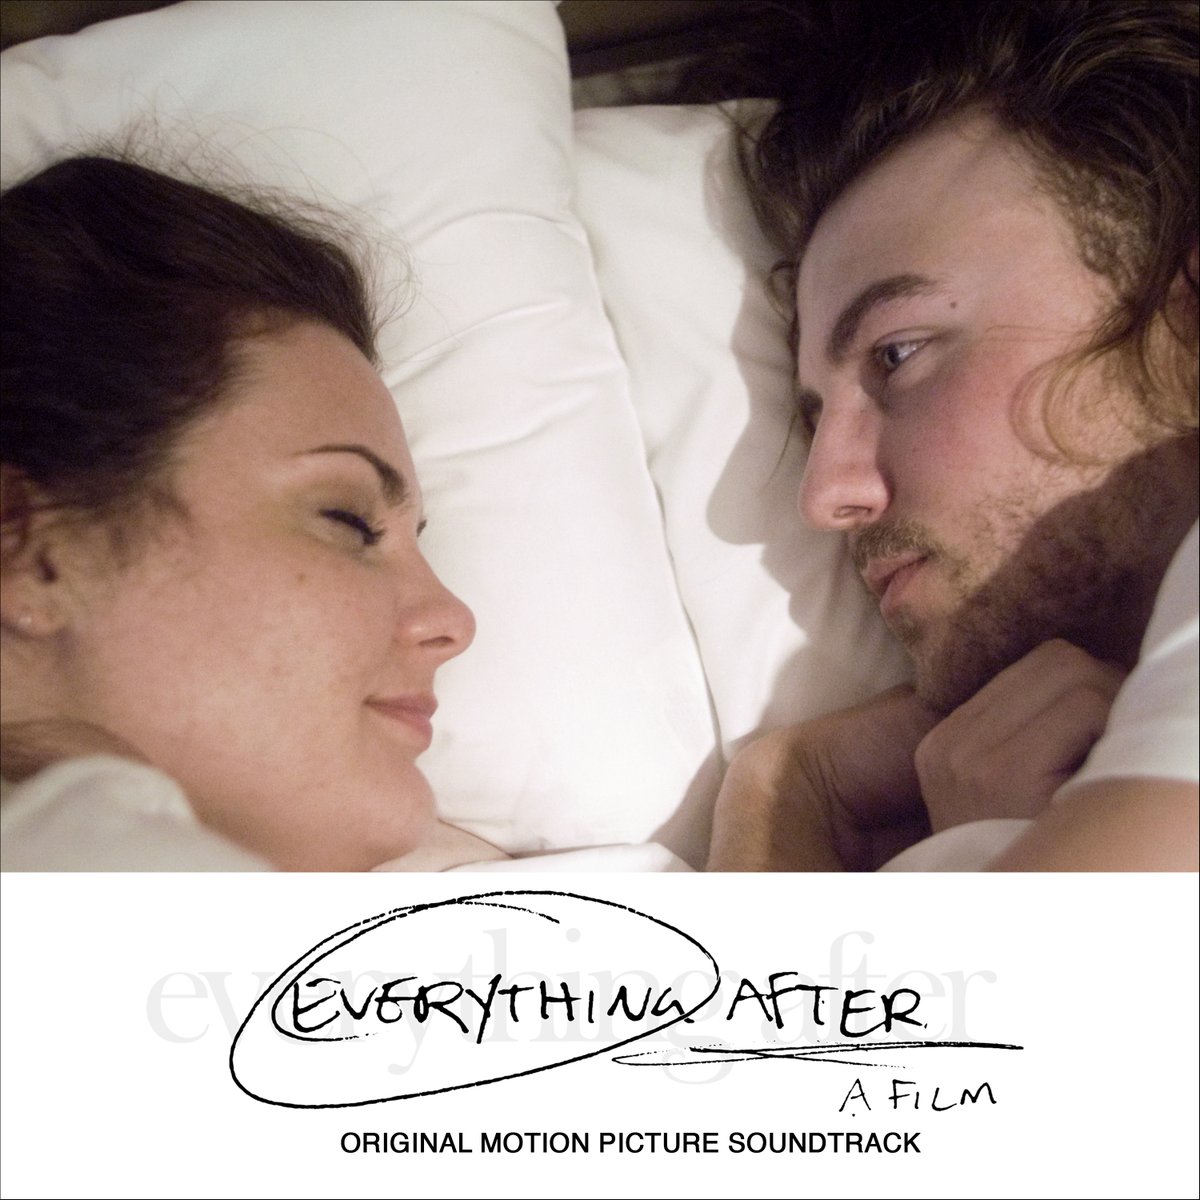 The Original Motion Picture Soundtrack for 'Everything After' is now available on all major streaming platforms. texture.fanlink.to/everythingafter